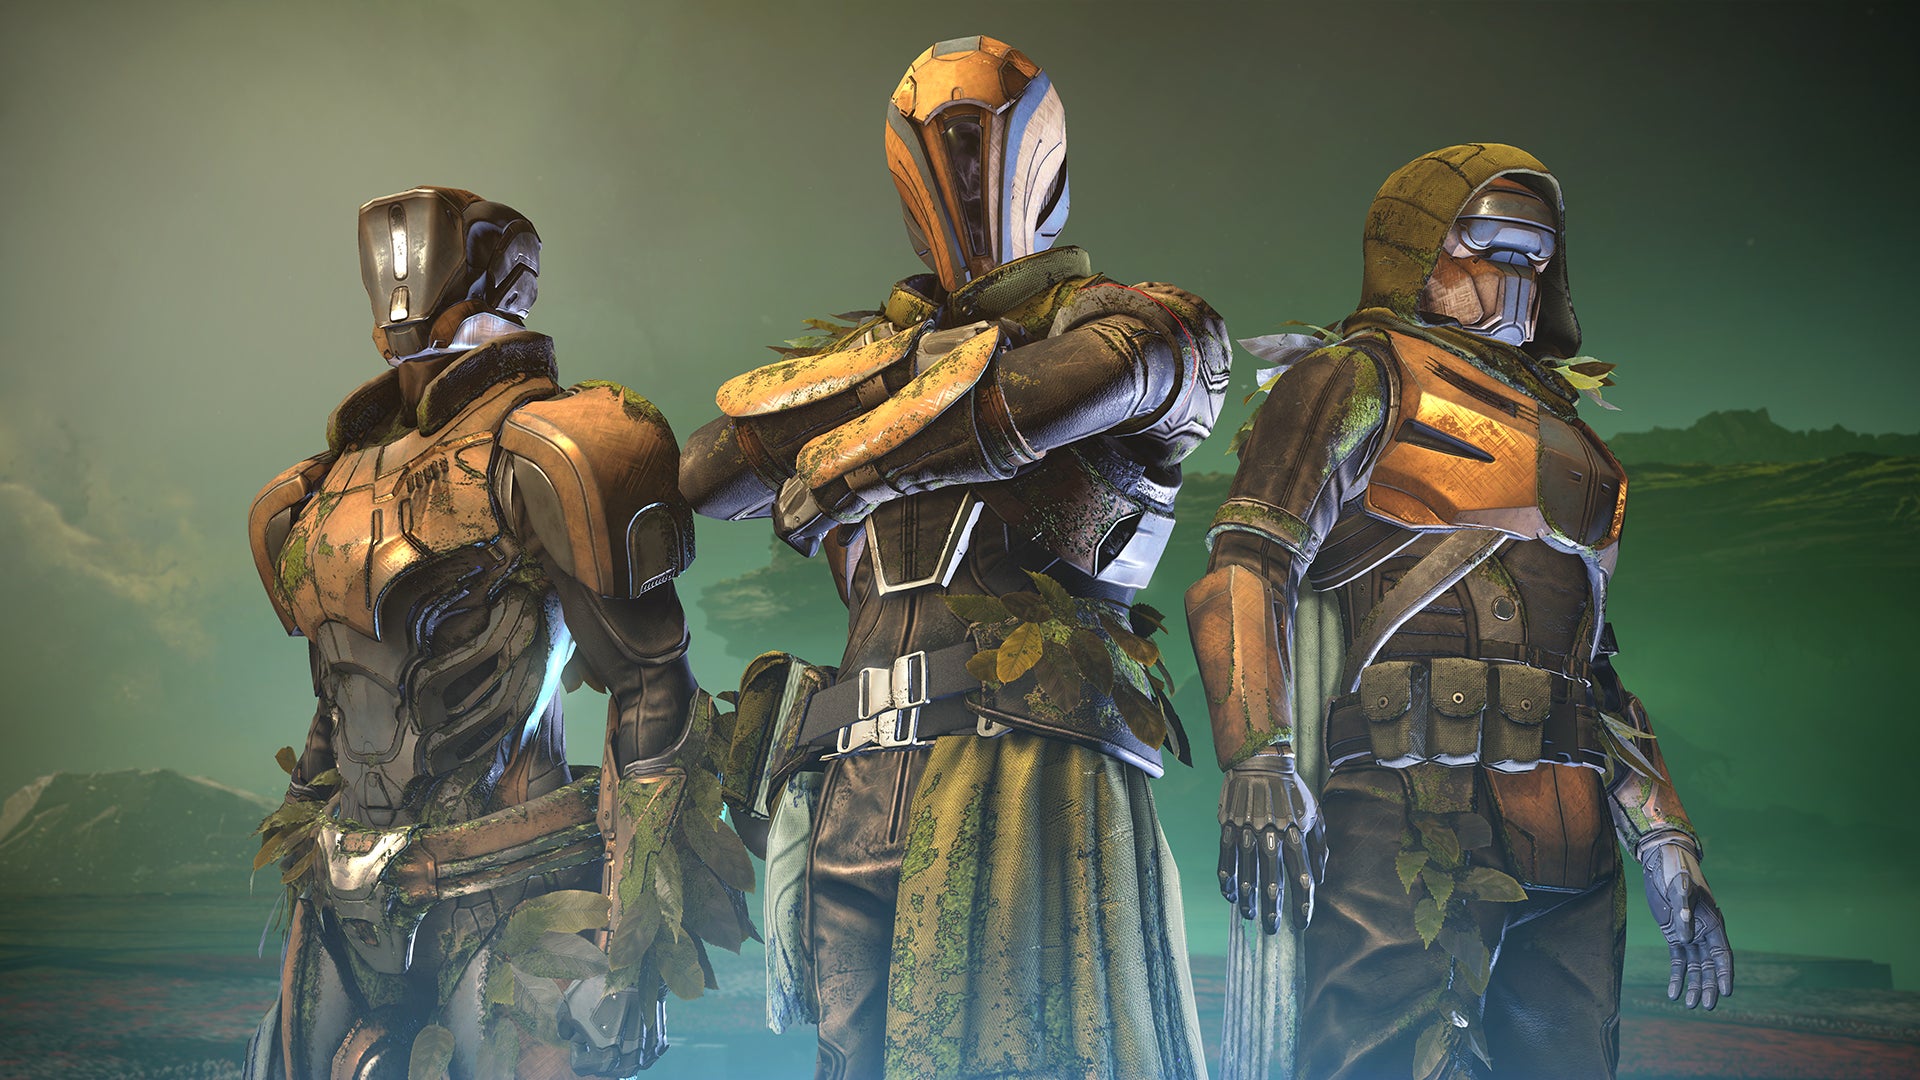 Image for Destiny 2 Shadowkeep Exotics List - All New Exotic Weapons and Armor for Shadowkeep